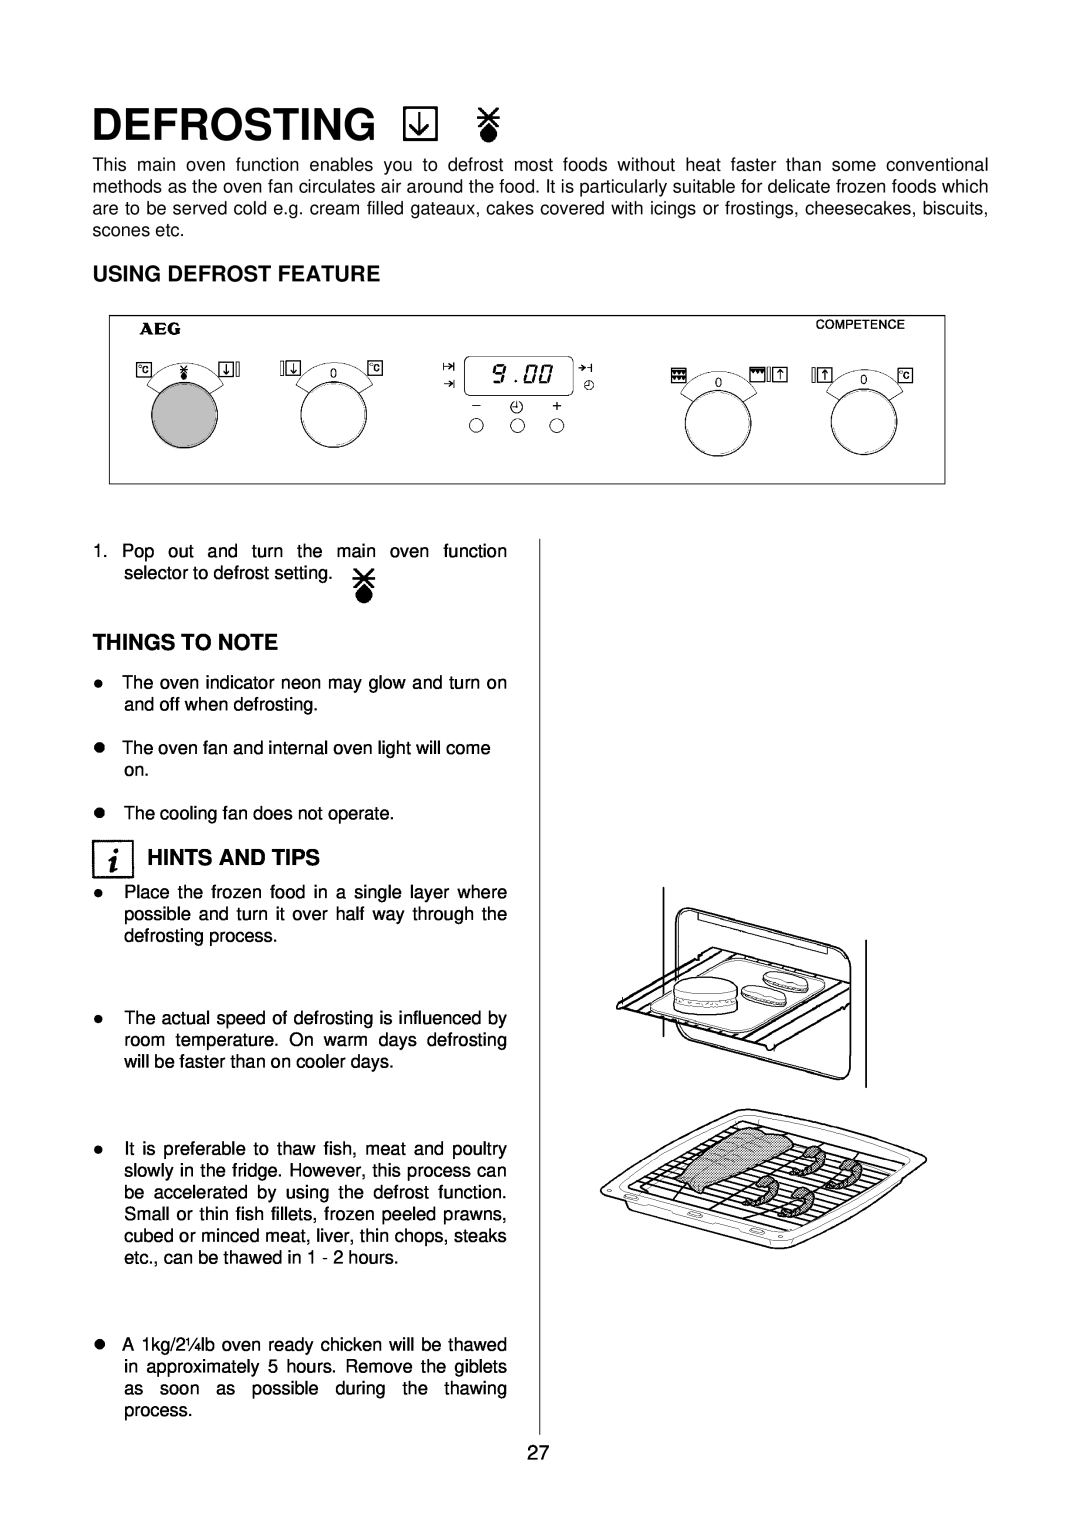 AEG D4100-1 manual Defrosting, Using Defrost Feature, Things To Note, Hints And Tips 